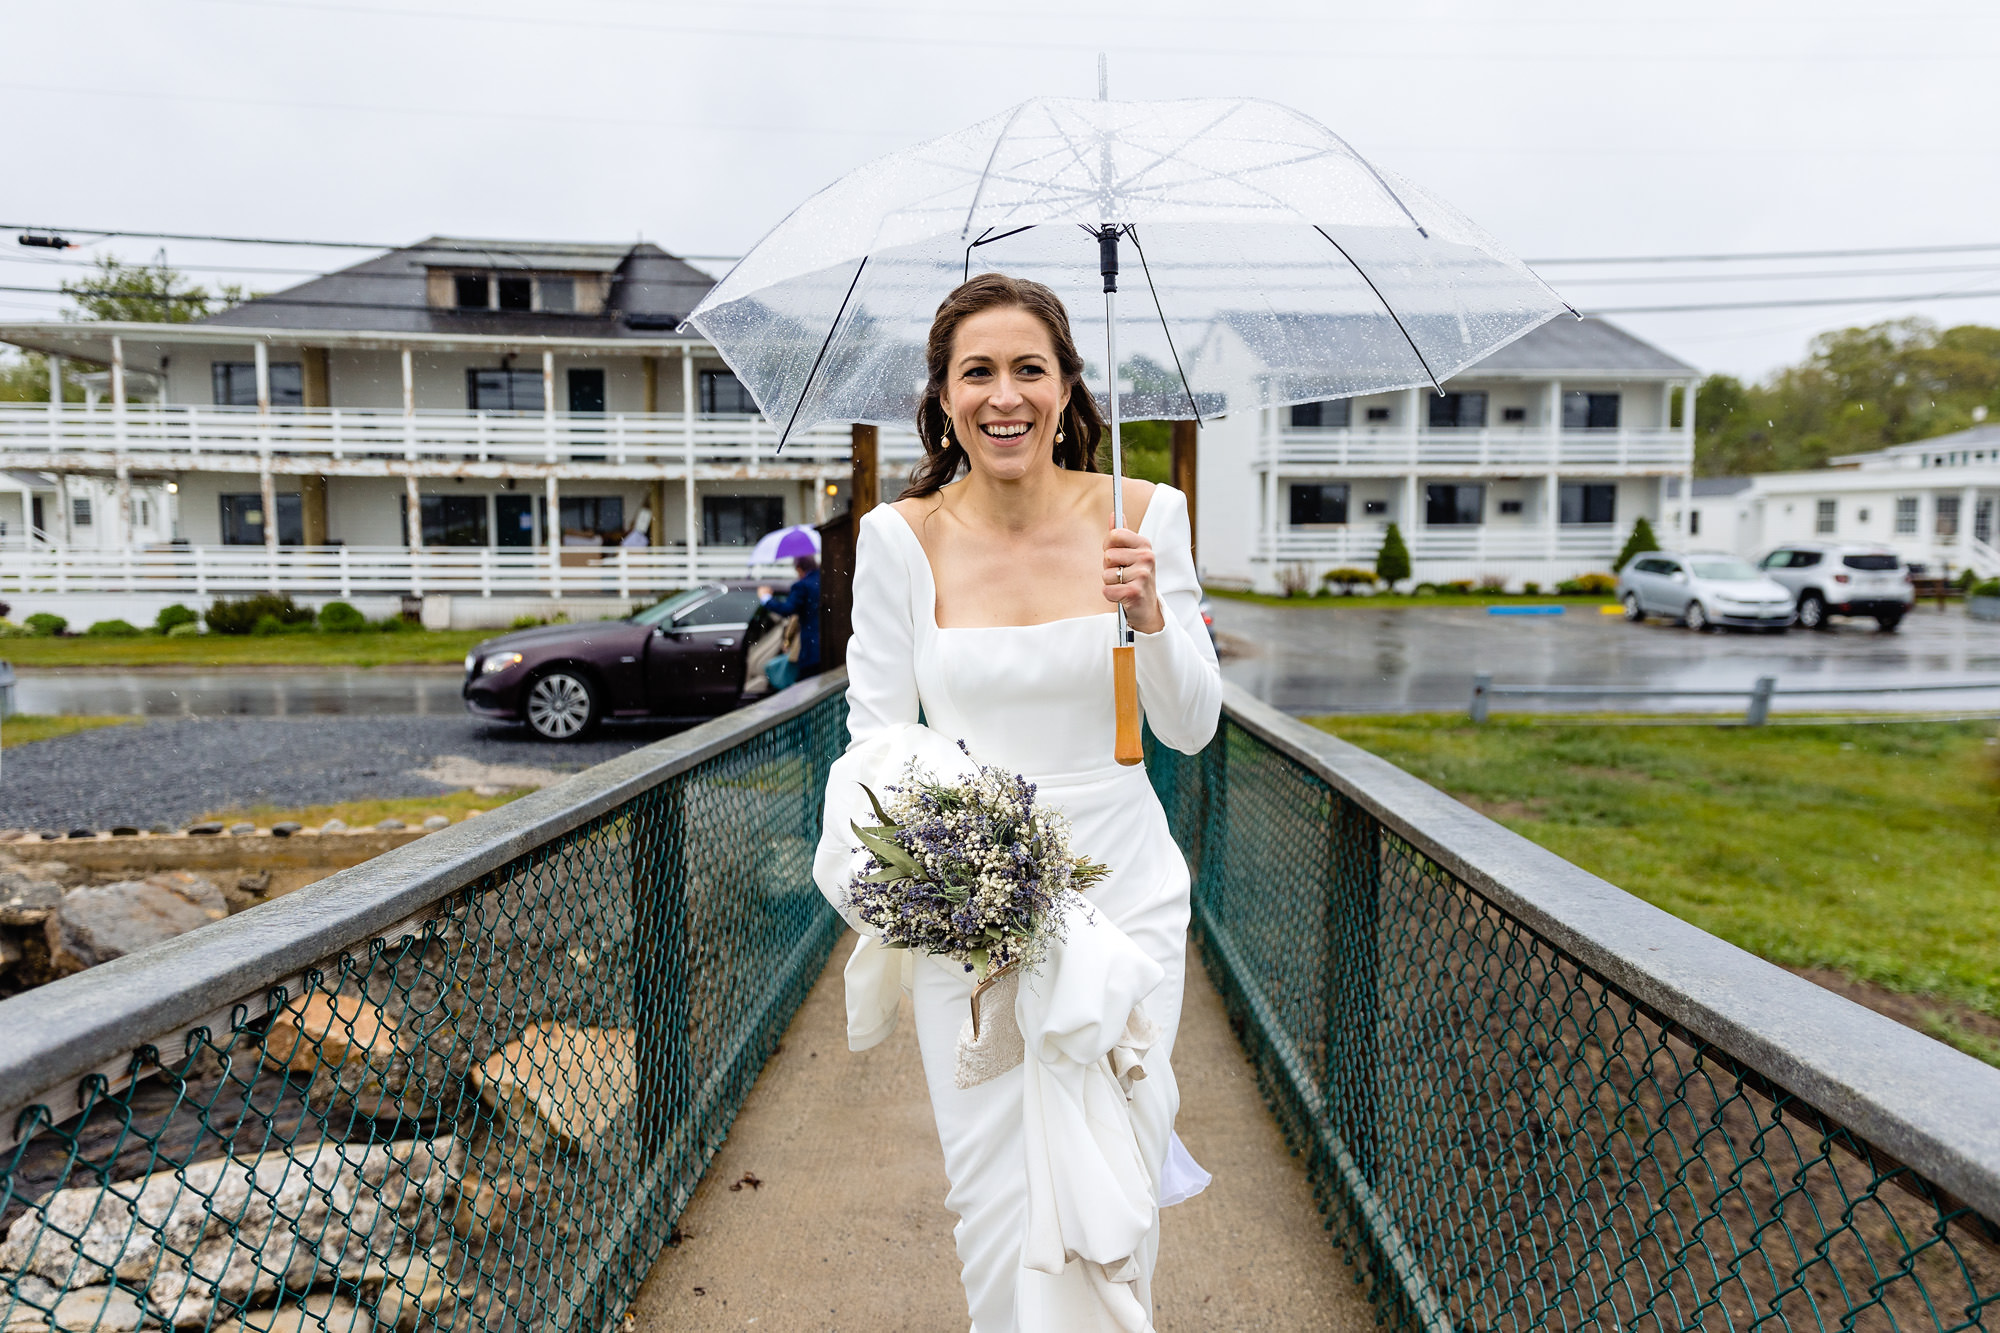 The bride walks to the boat on her wedding day in Boothbay Harbor, Maine